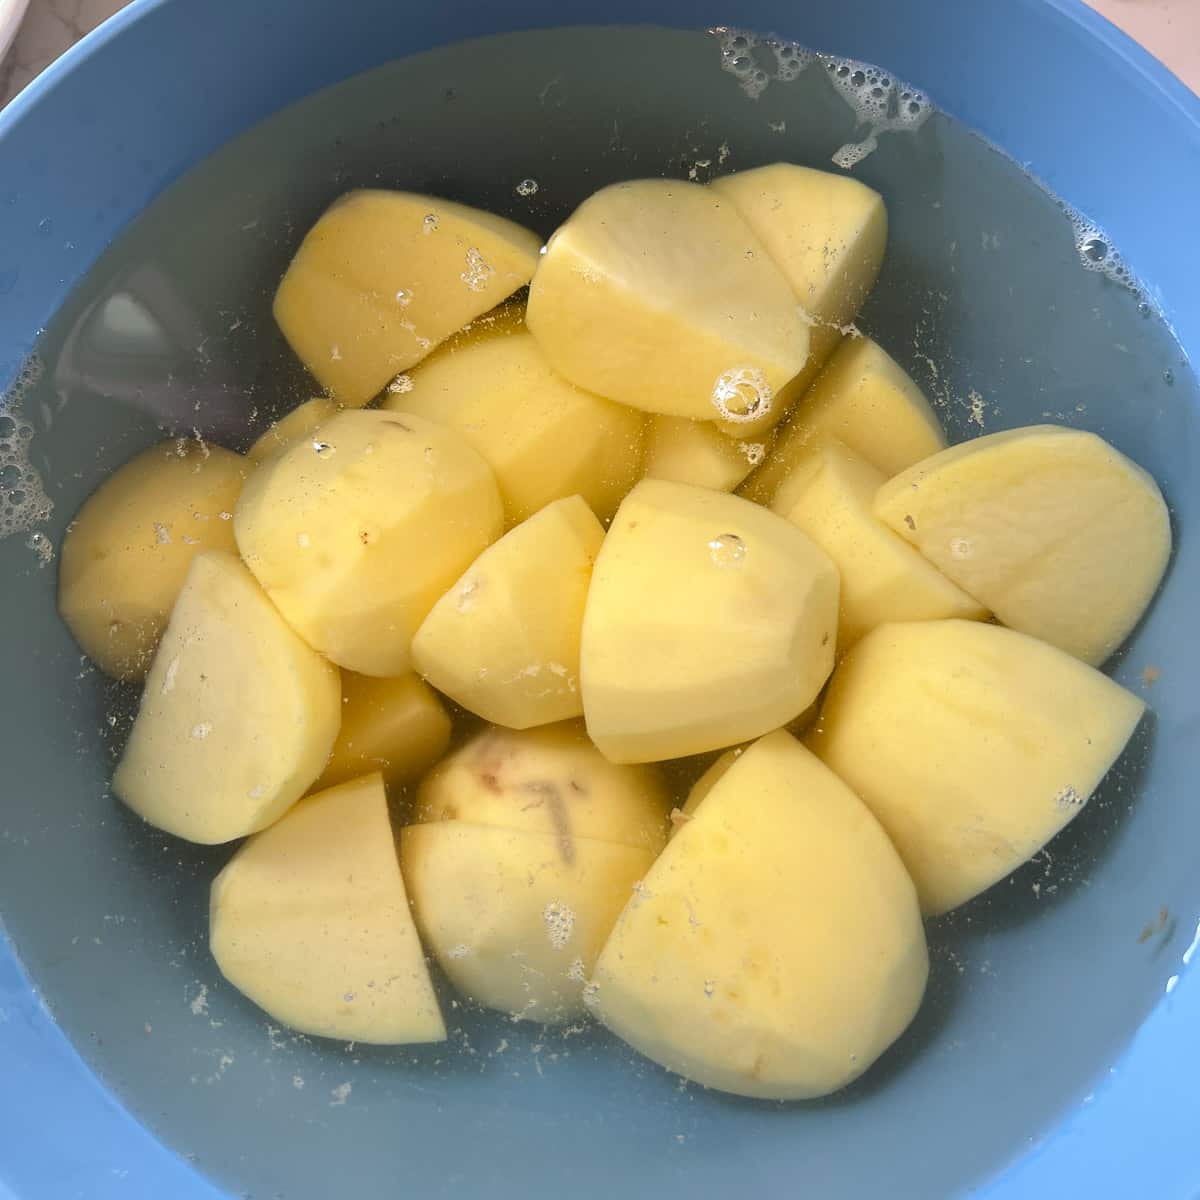 peeled and chopped potatoes soaking in cold water